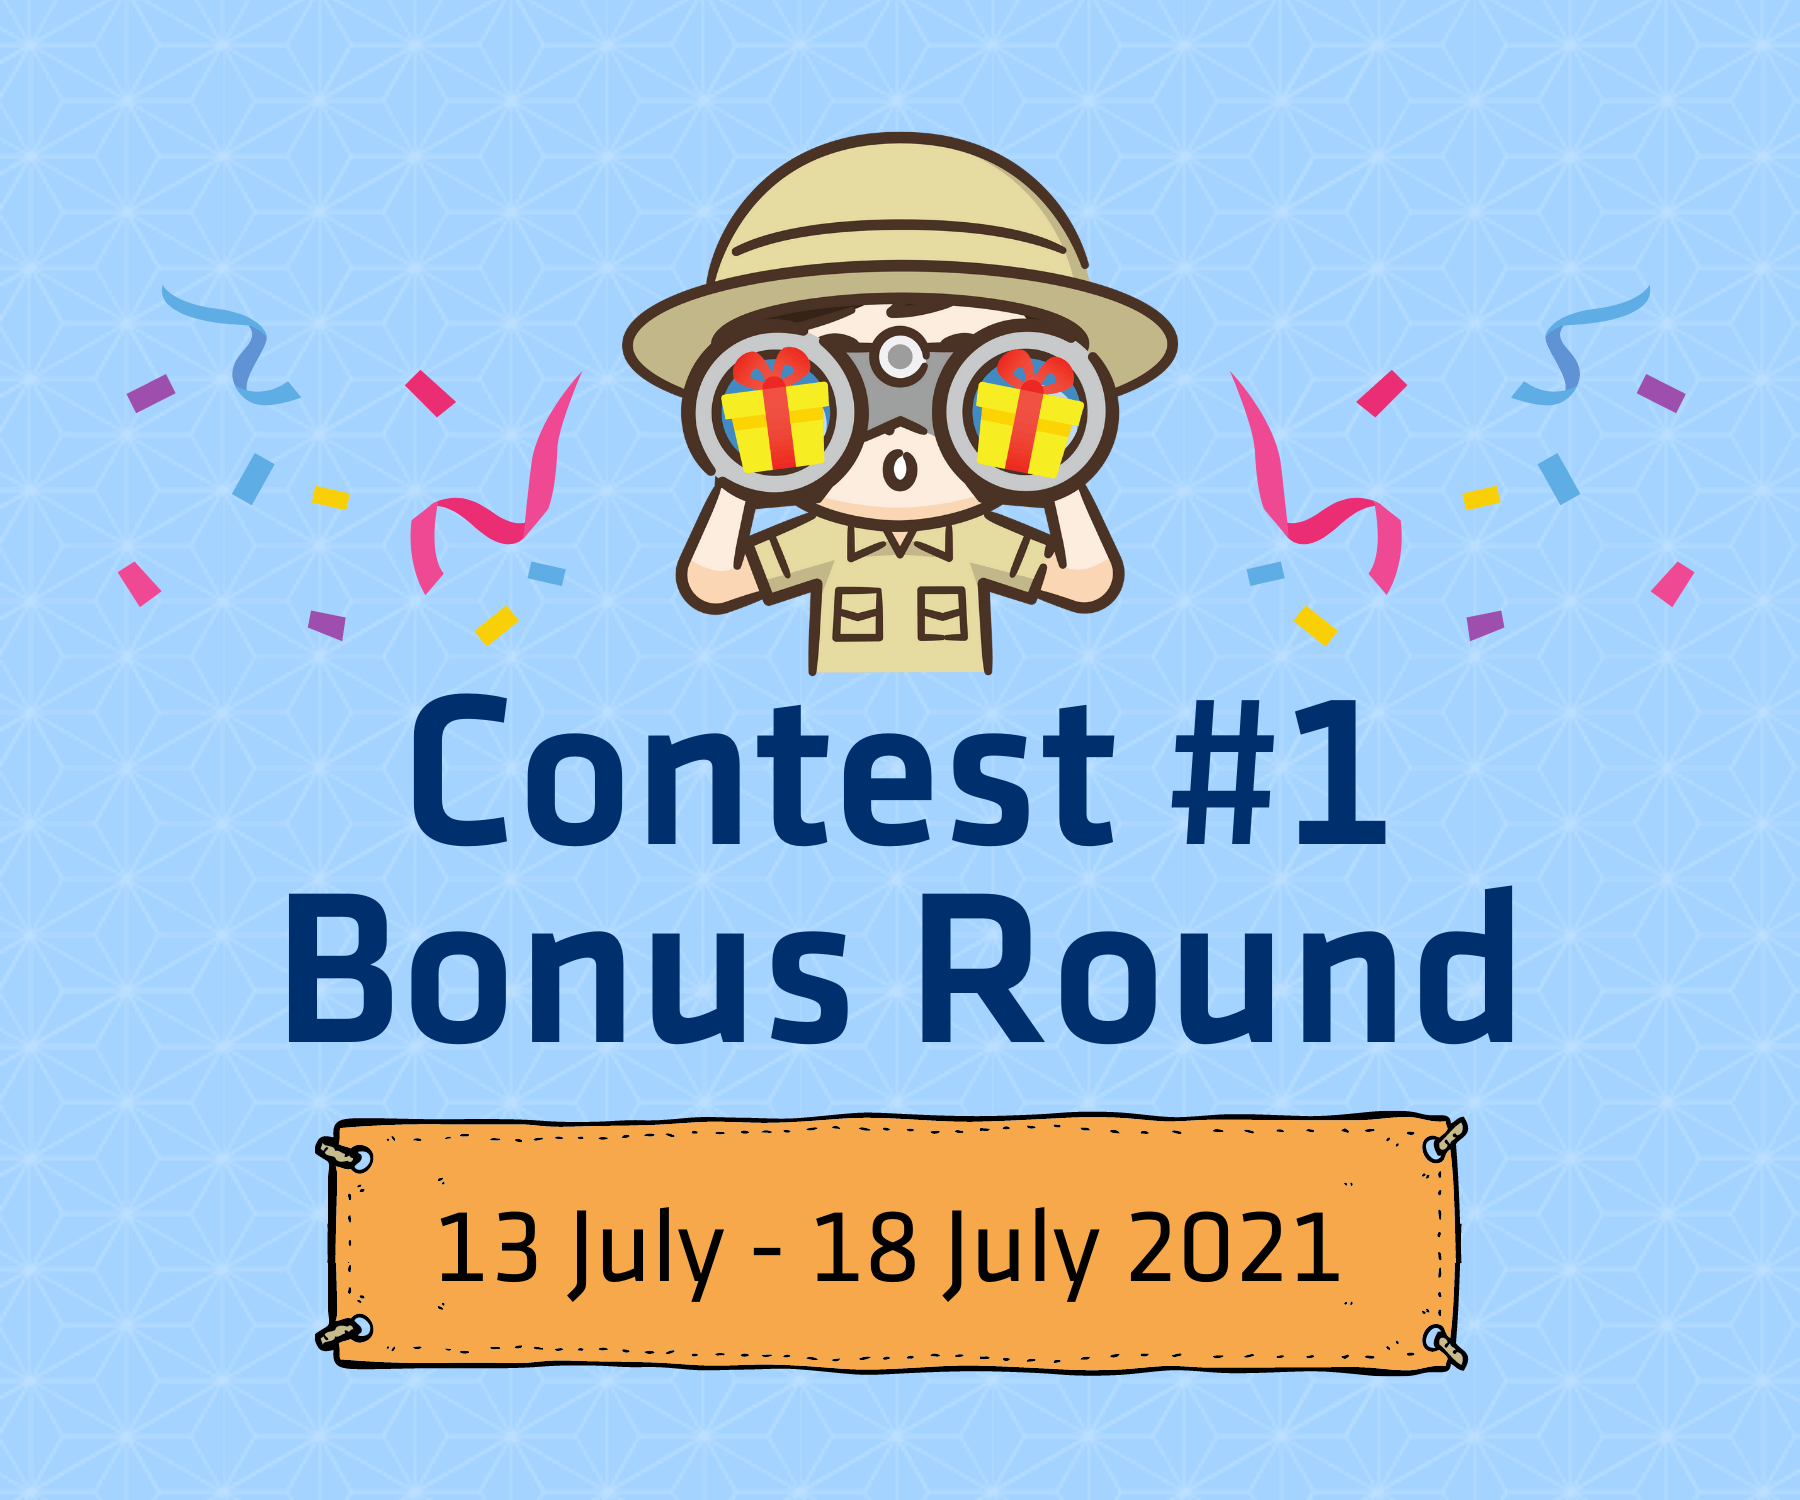 Contest #1 Bonus Round - Stand a chance to DOUBLE your winnings!